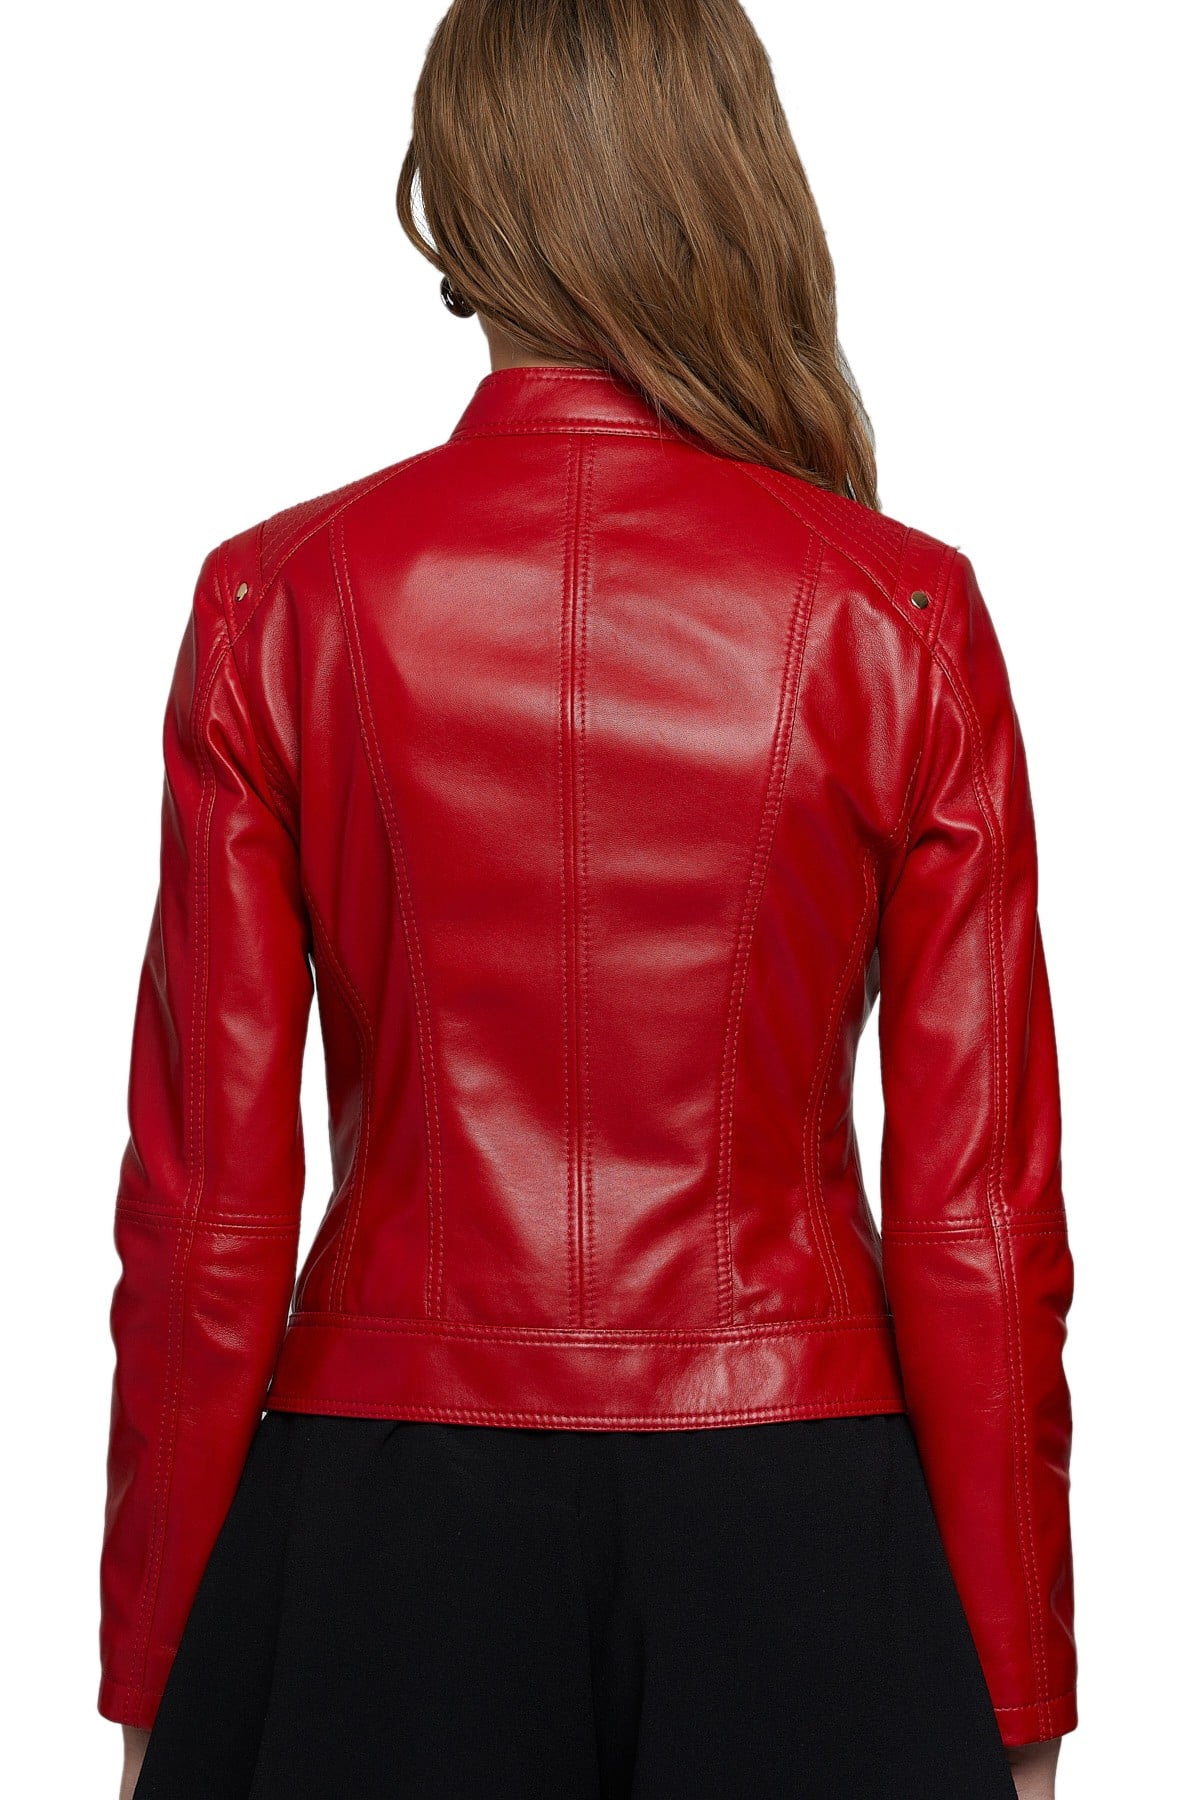 Womens Red Leather Jacket For Bikers 3 